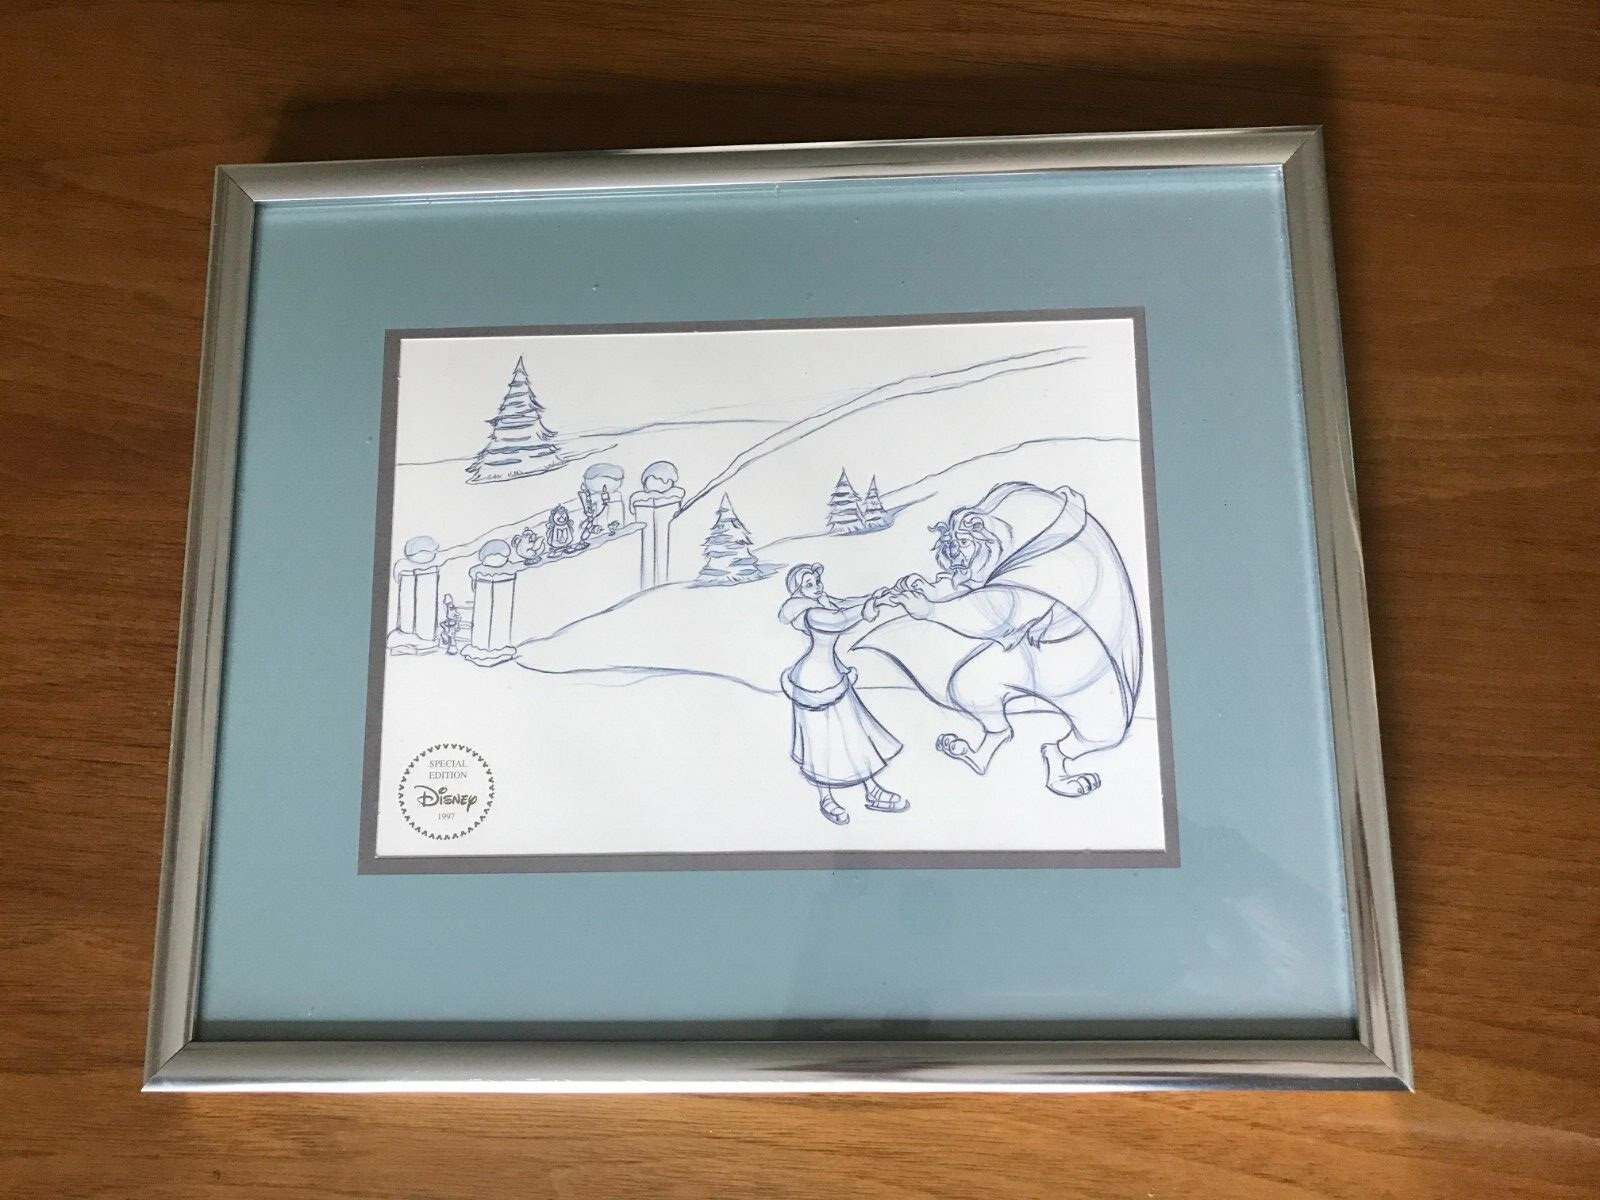 Disney 1997 Beauty And The Beast Ice Skating Sketch Drawing Special Edition